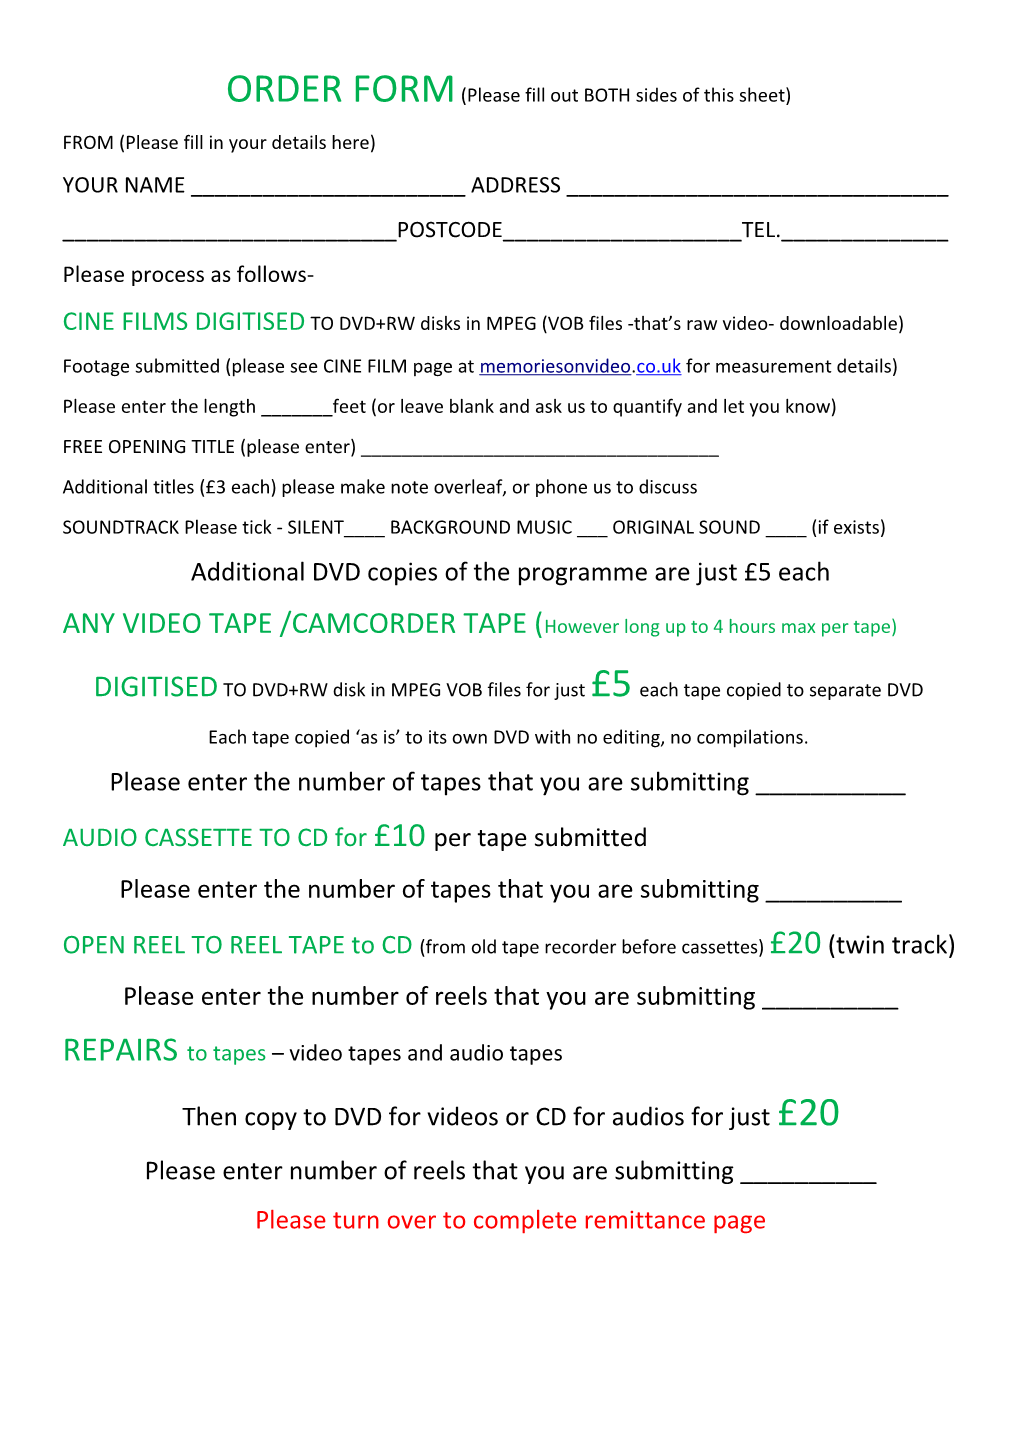 ORDER FORM(Please Fill out BOTH Sides of This Sheet)